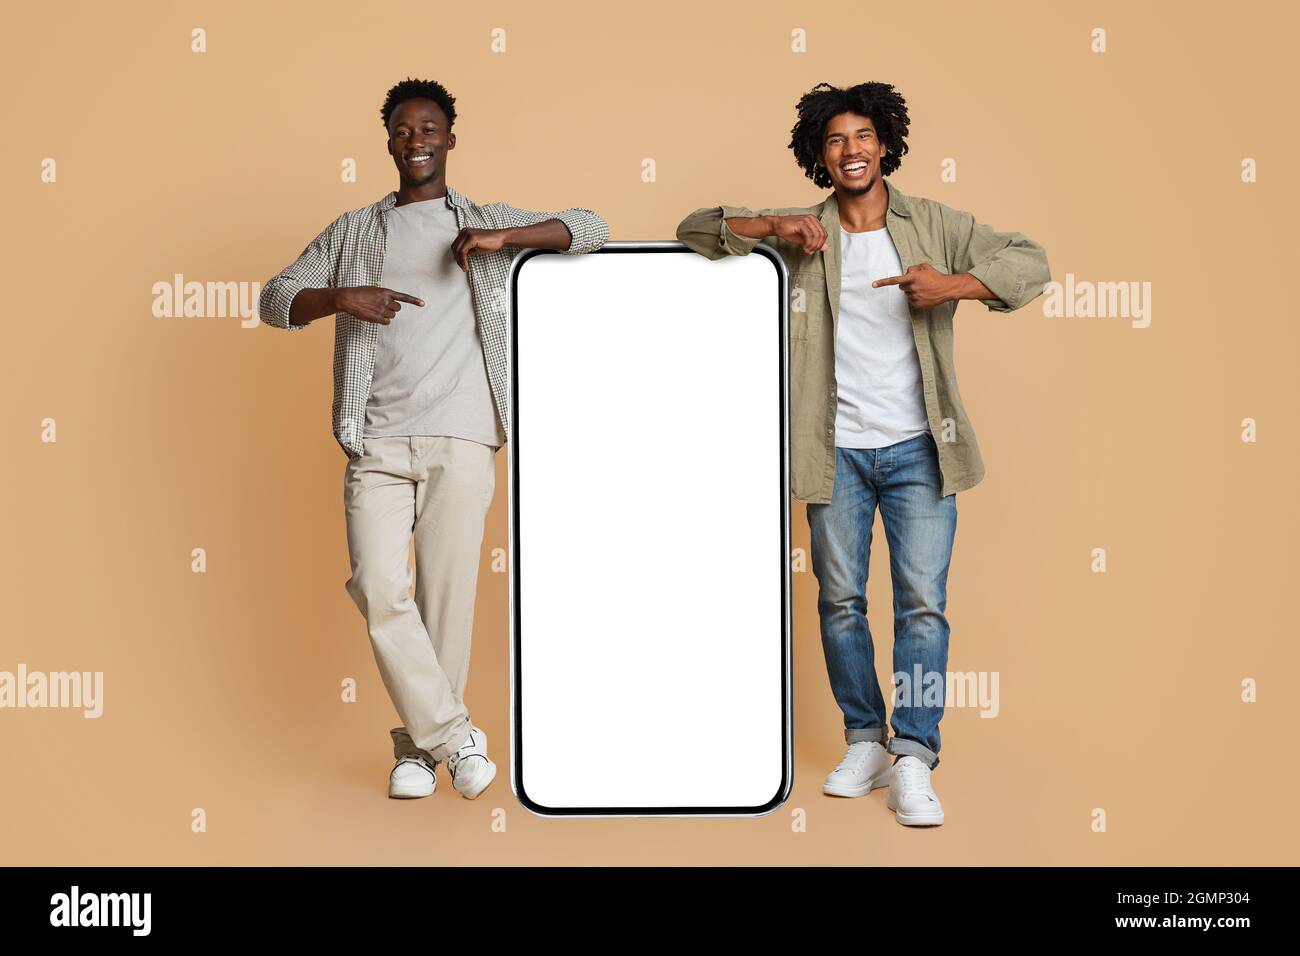 Mobile Ad. Two Black Guys Pointing At Big Smartphone With White Screen Stock Photo